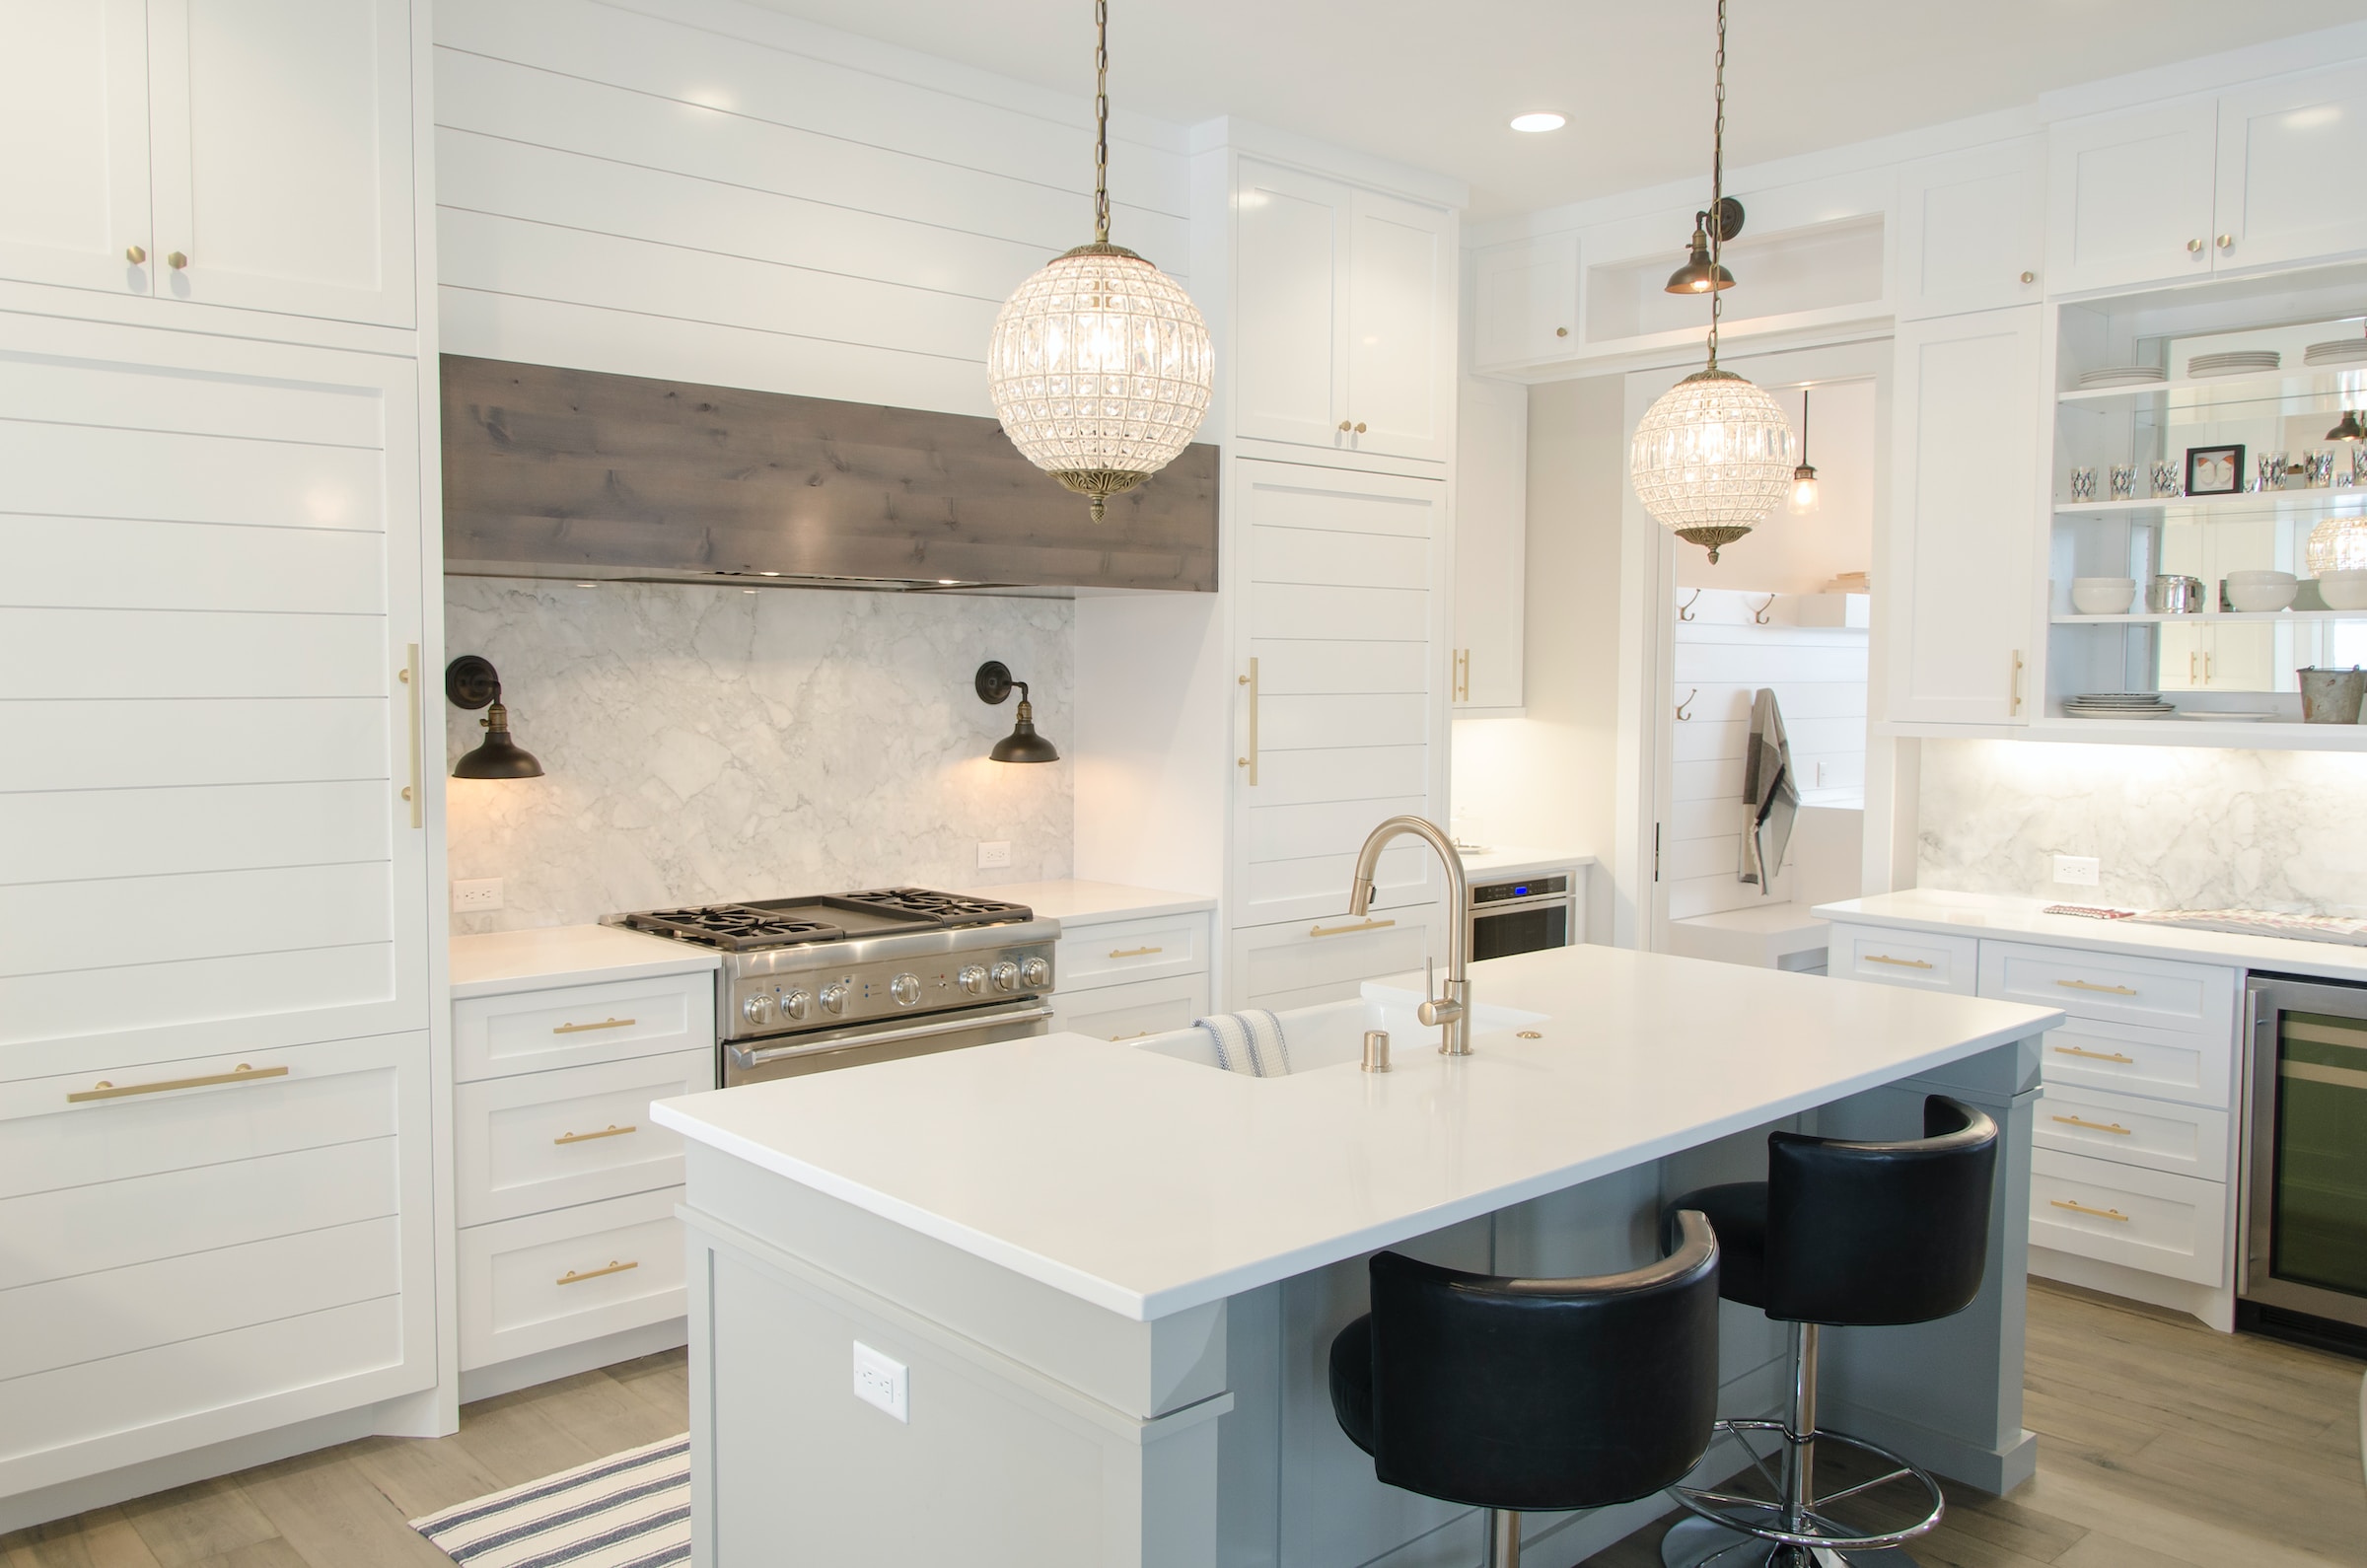 A kitchen with white cabinets and bar stools, featuring modern lighting.